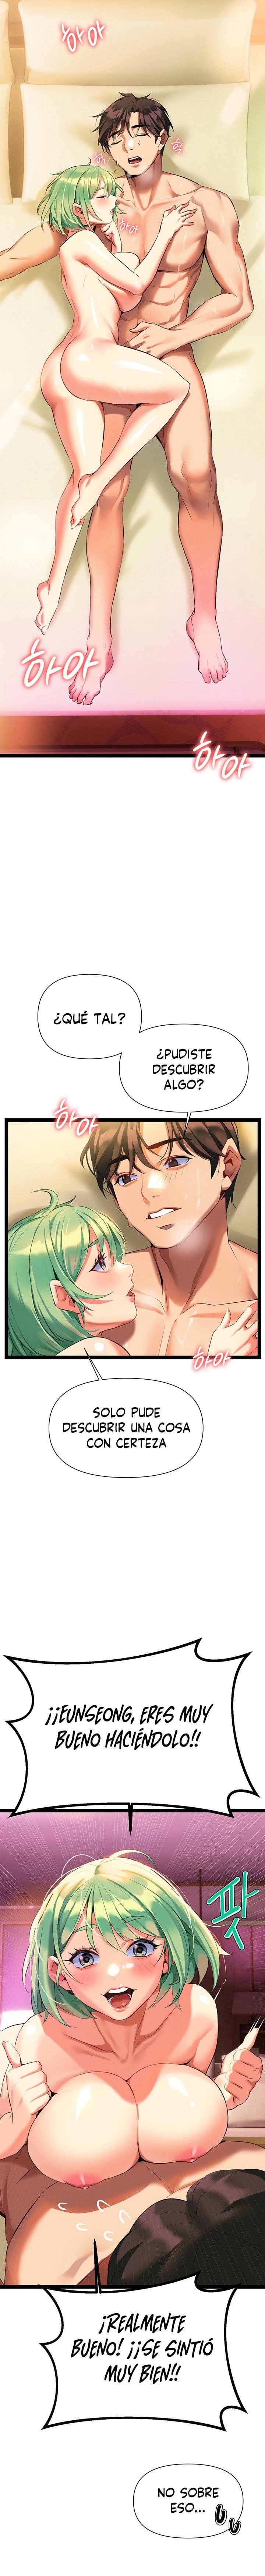 I Need You, Noona Raw - Chapter 6 Page 3